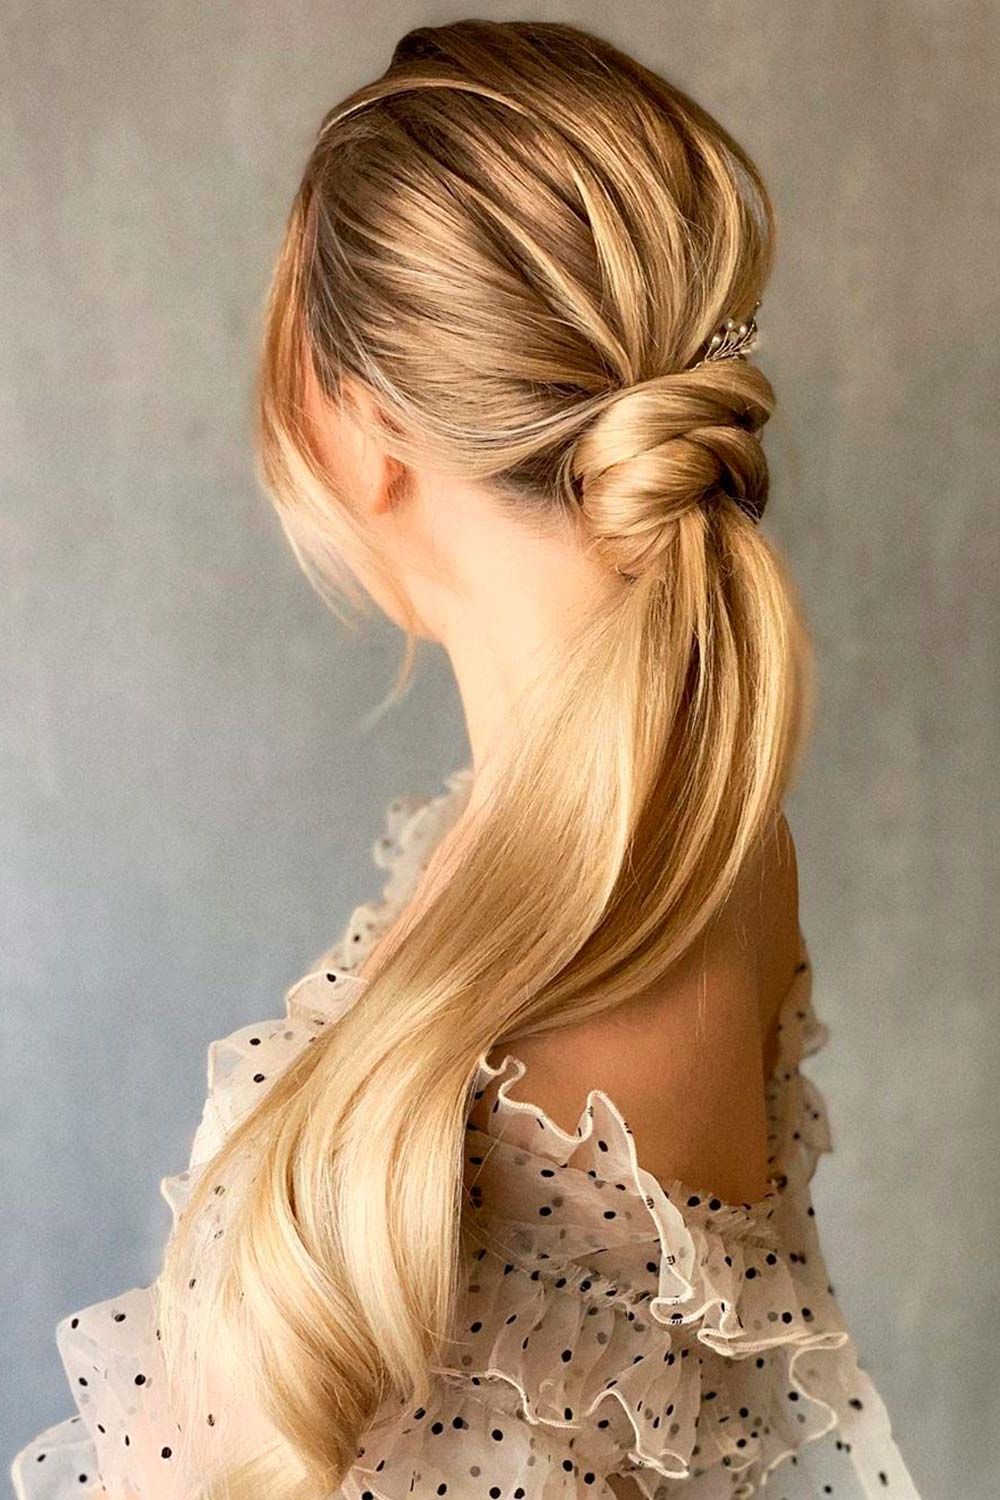 35 Unique Low Ponytail Ideas For Simple But Attractive Looks Pertaining To Most Recent Low Pony Hairstyles With Bangs (View 17 of 25)